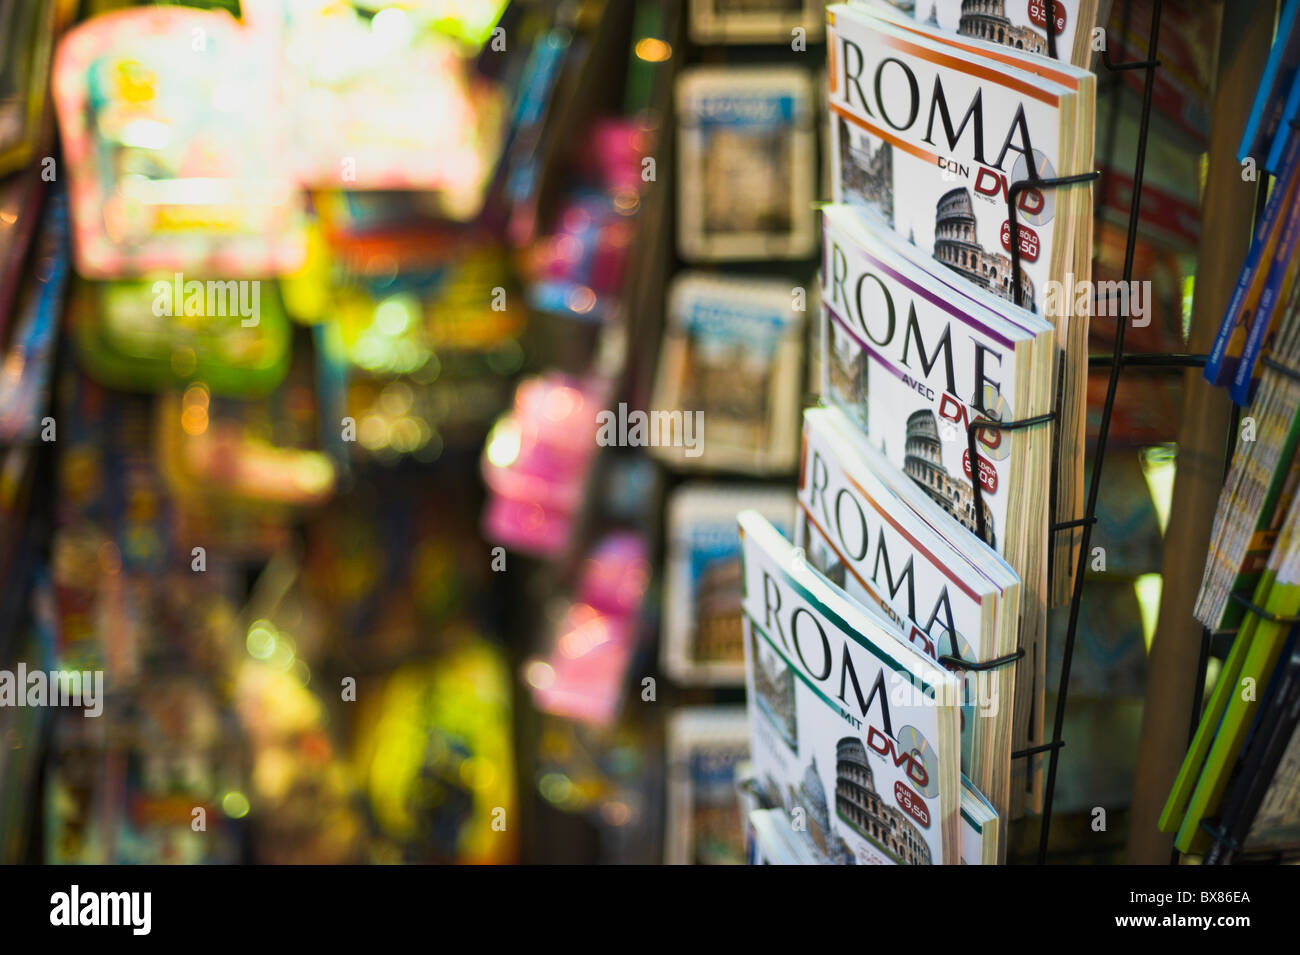 Night photo of Rome tourist guides for sale at a newsstand, shallow DOF Stock Photo